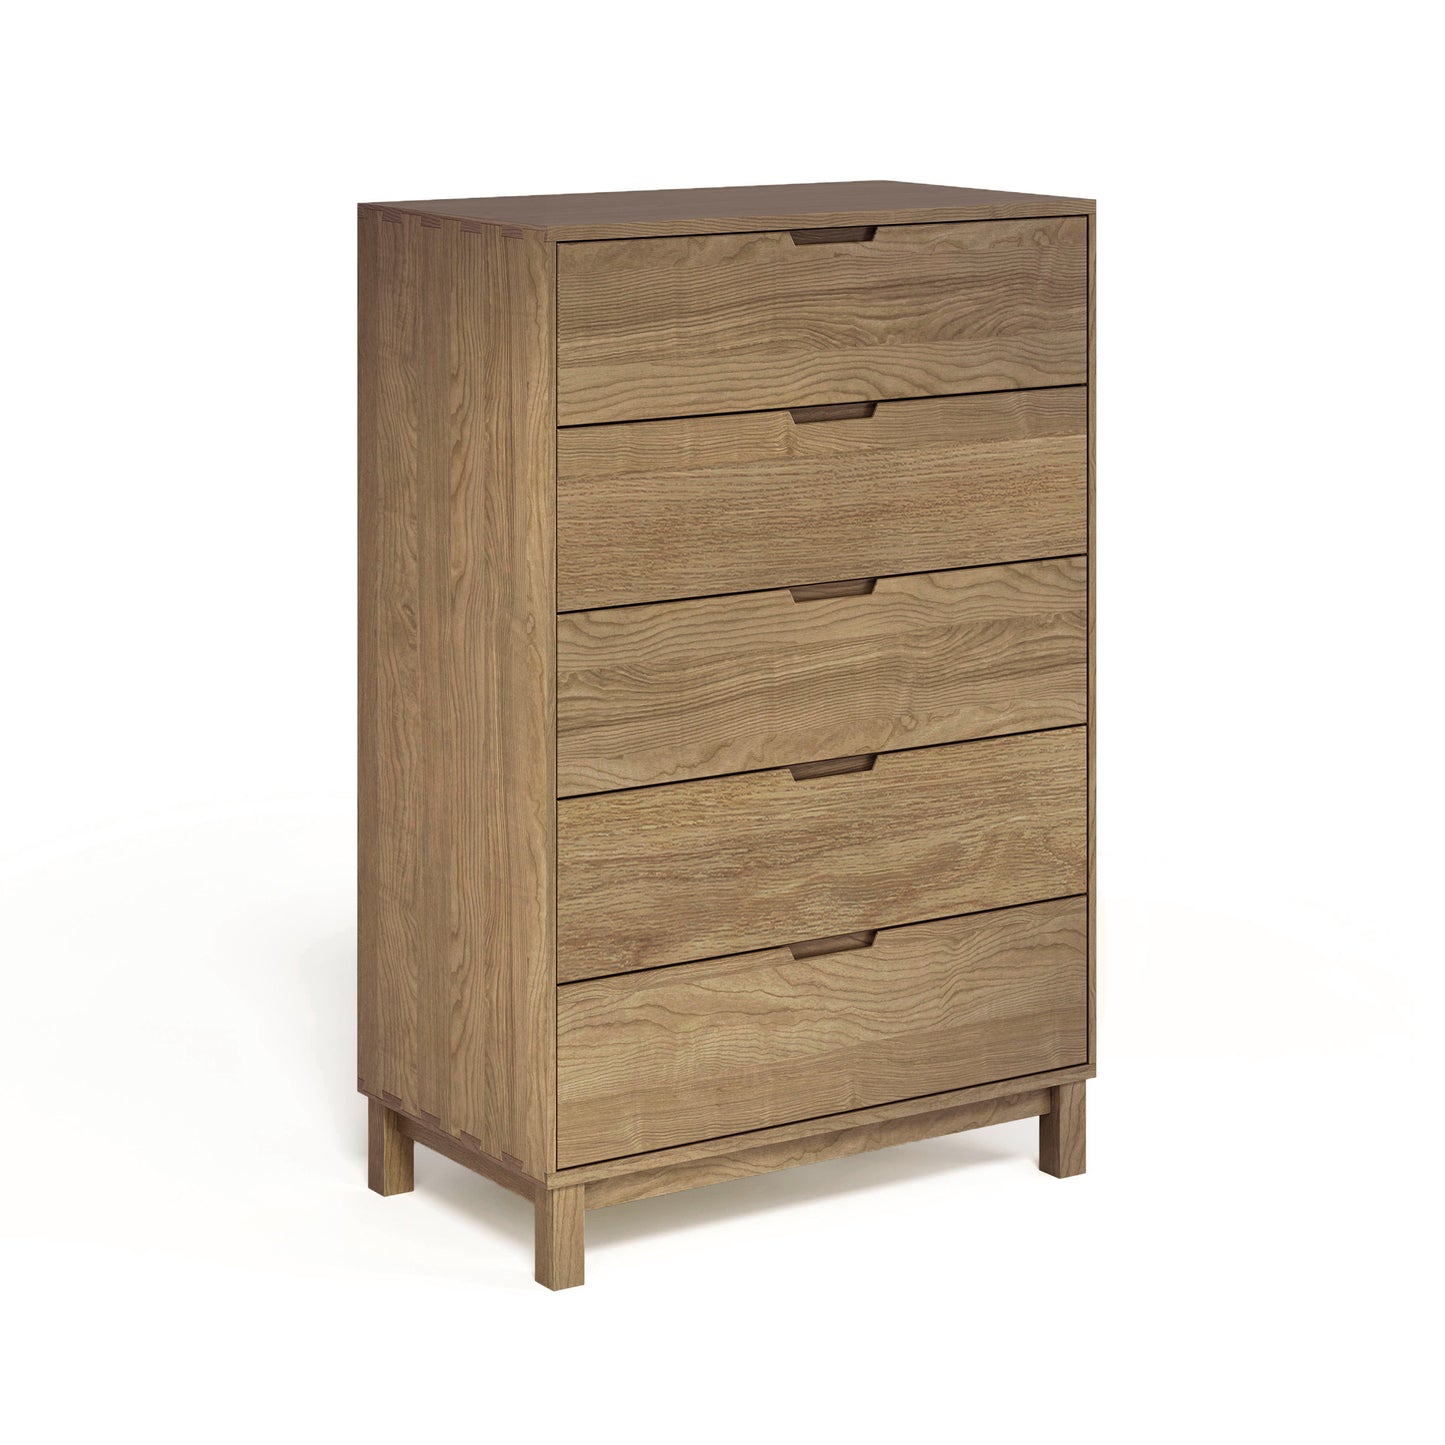 A solid oak hardwood Oslo 5-Drawer Wide Chest from the Copeland Furniture Collection on a white background.